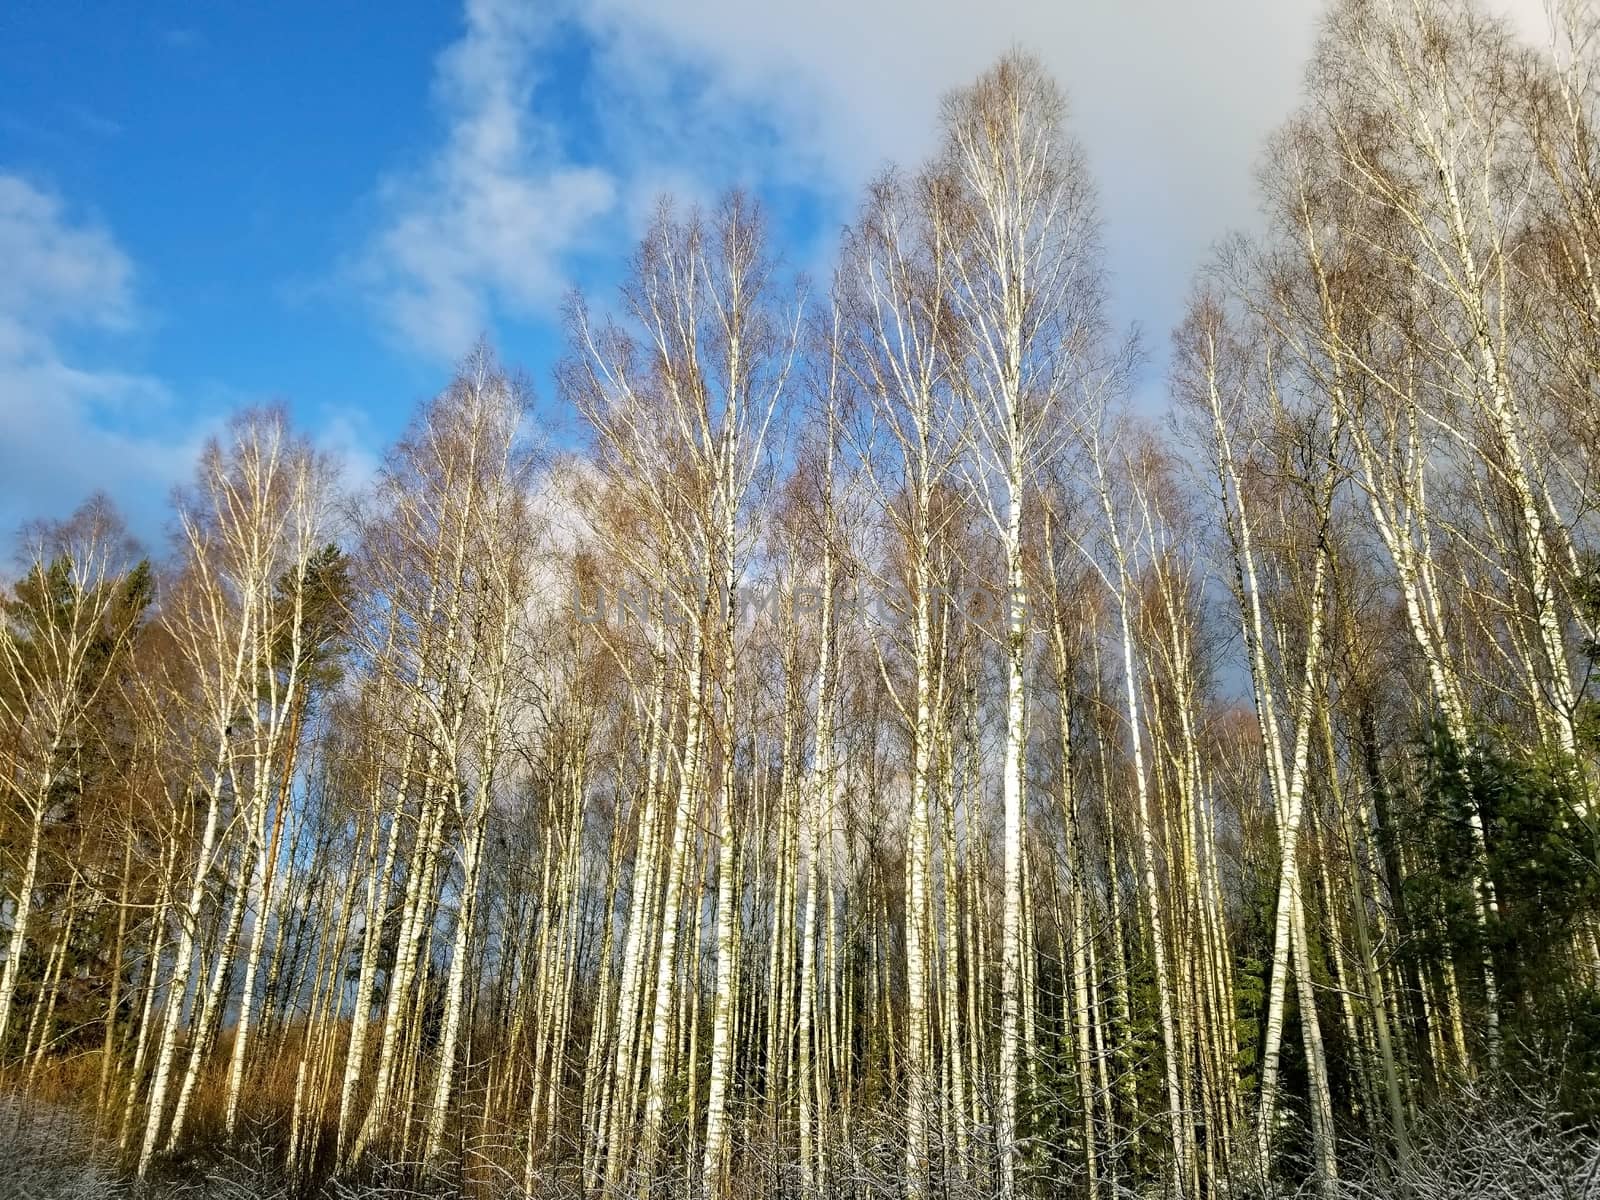 View of a winter birch forest against a blue sky by zakob337